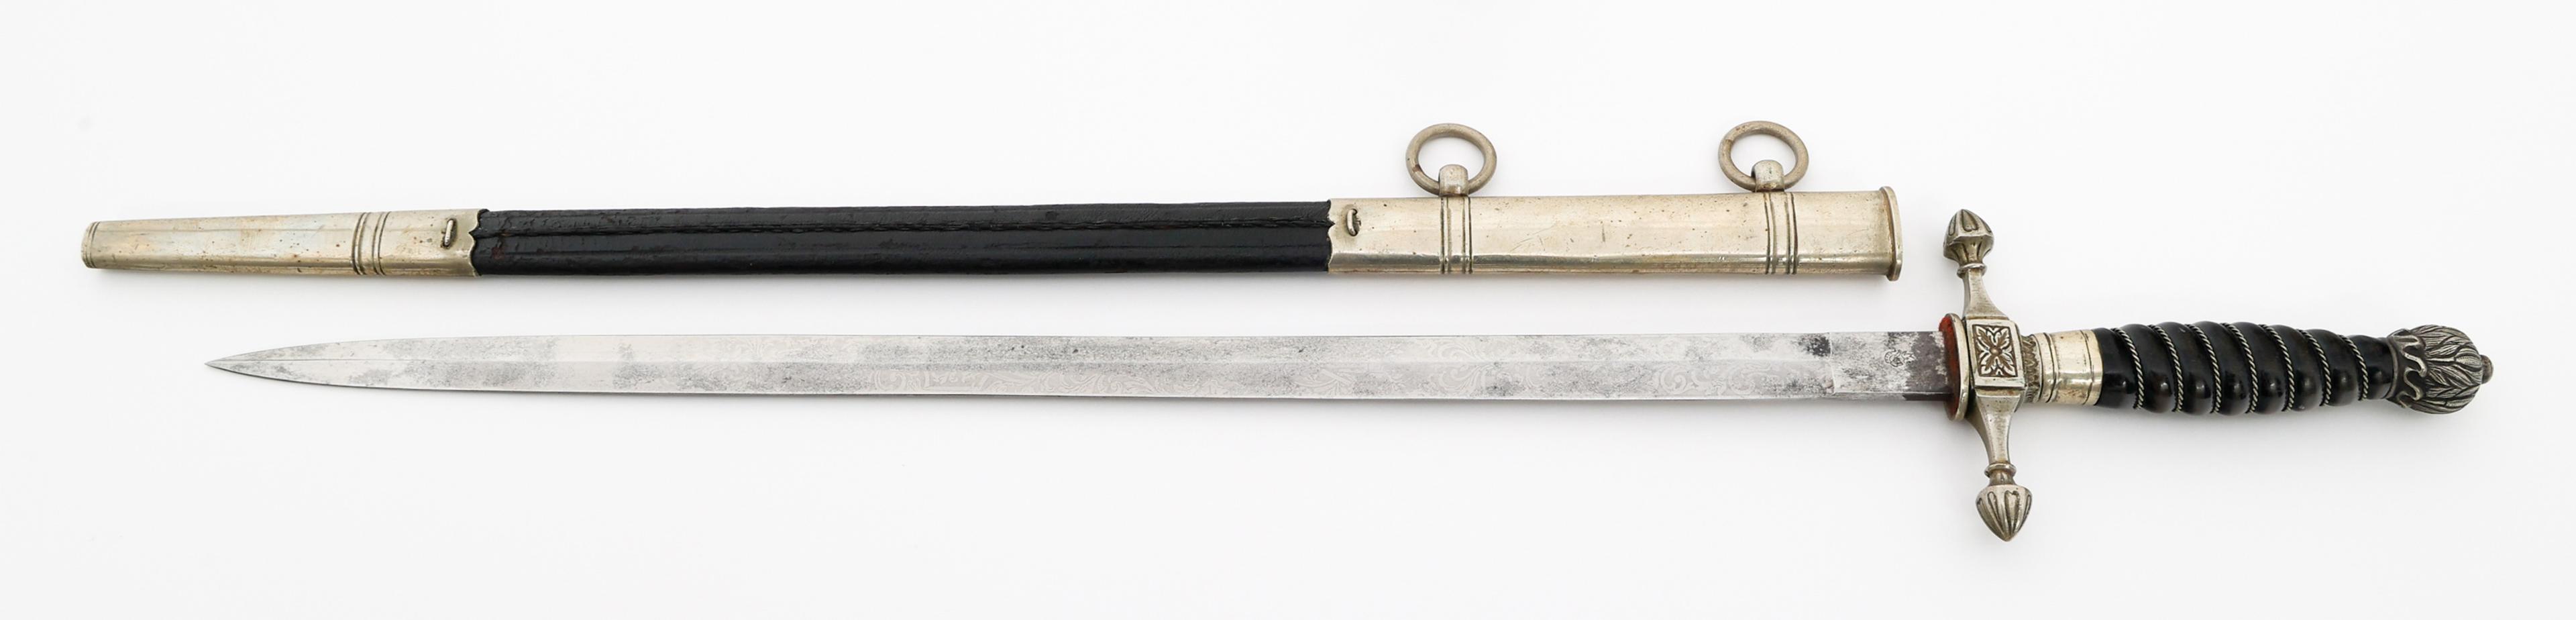 WWI IMPERIAL GERMAN FIRE OFFICIAL'S DRESS DAGGER